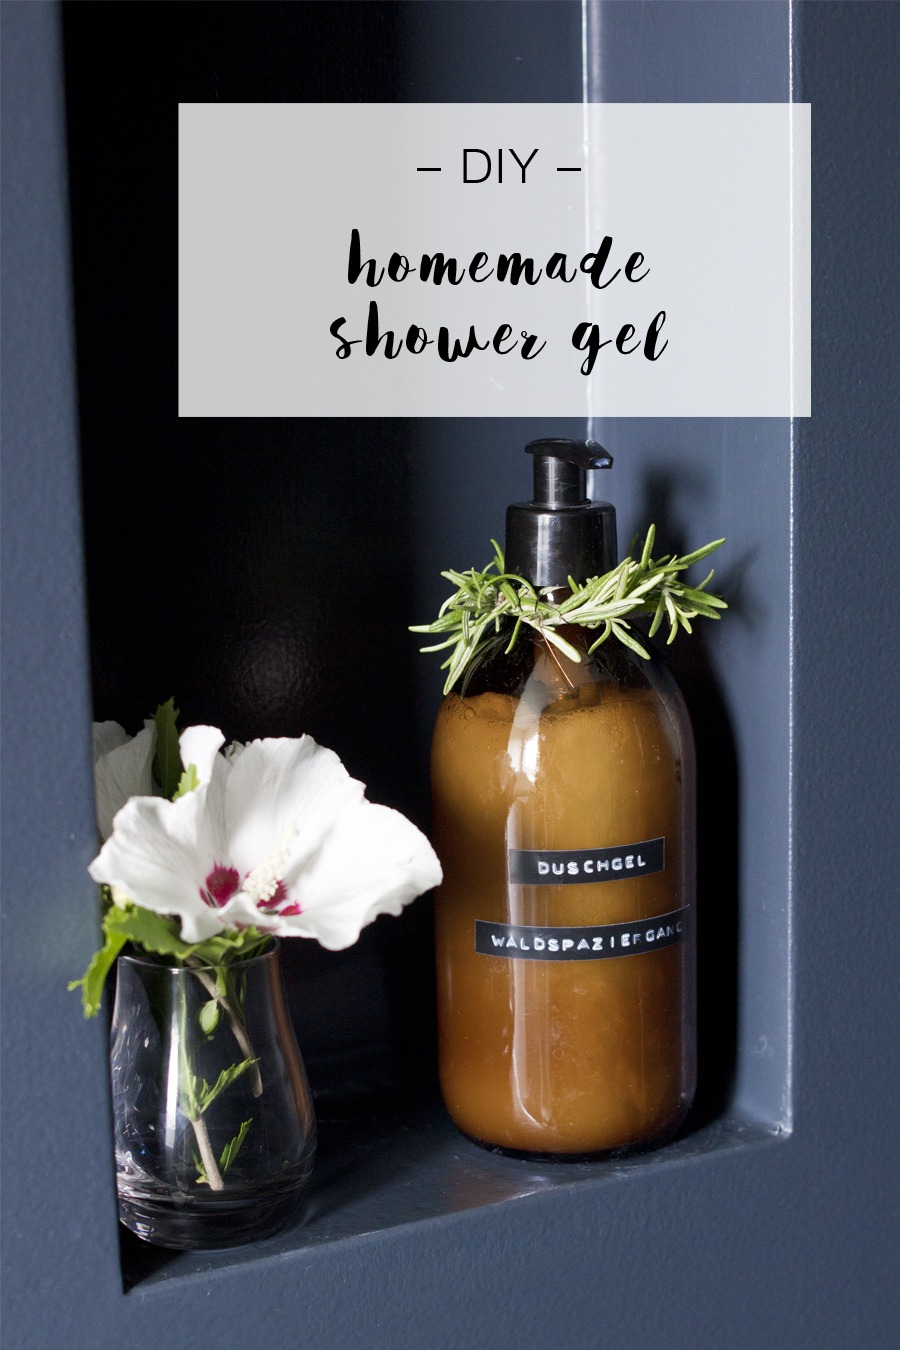 Homemade shower gel | LOOK WHAT I MADE ...